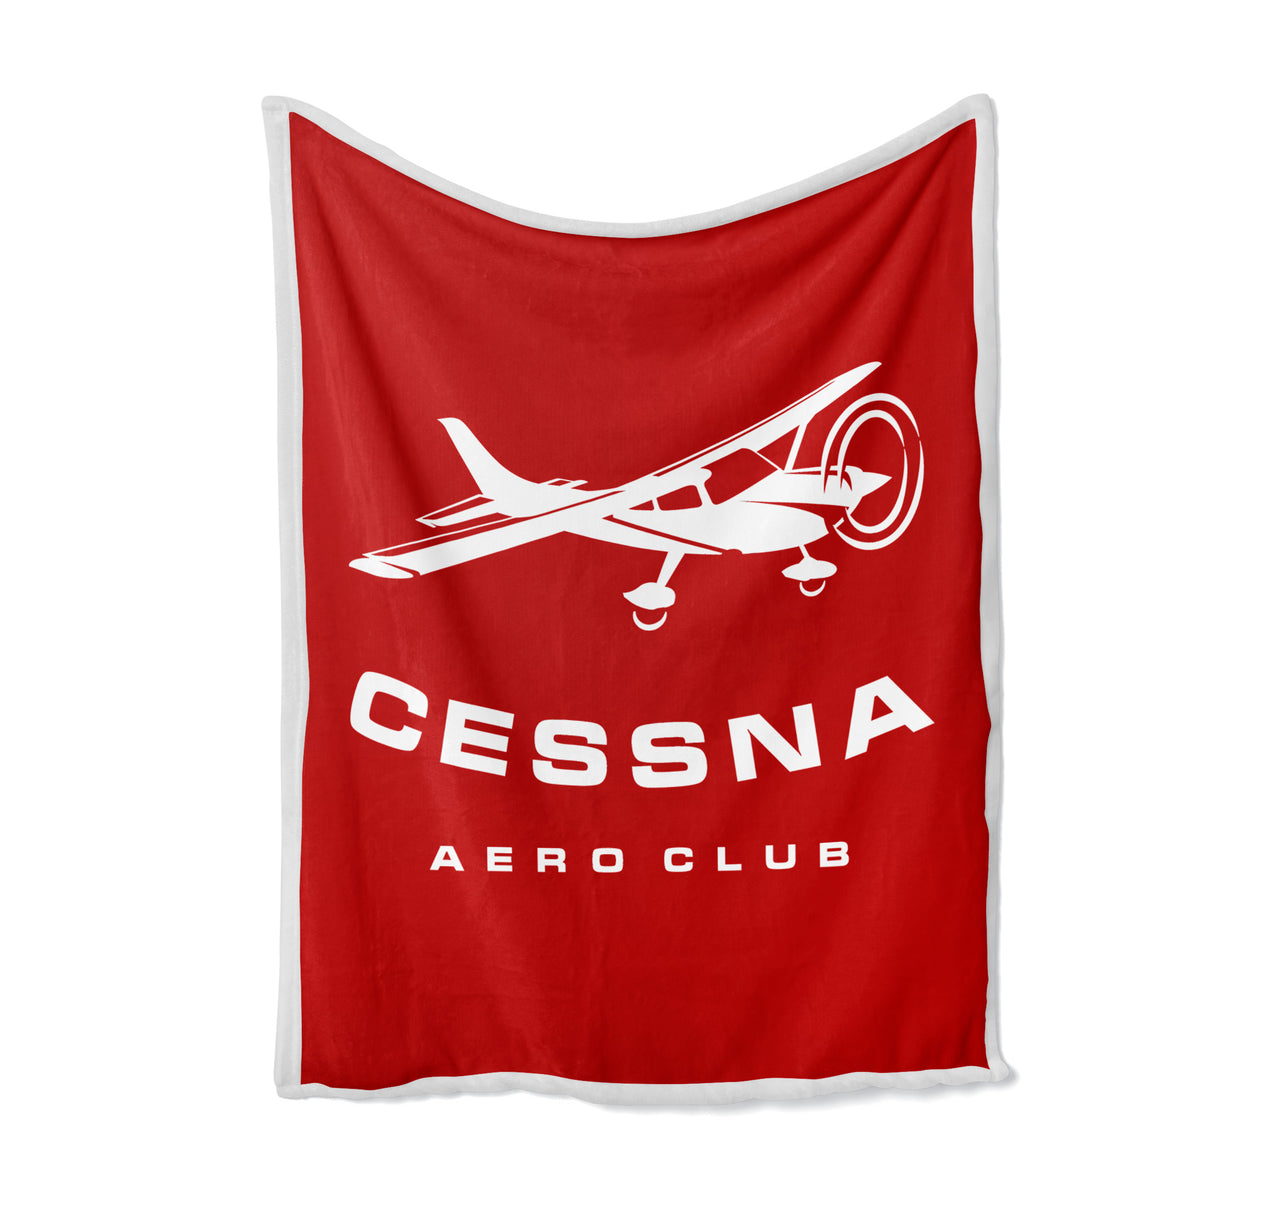 Cessna Aeroclub Designed Bed Blankets & Covers